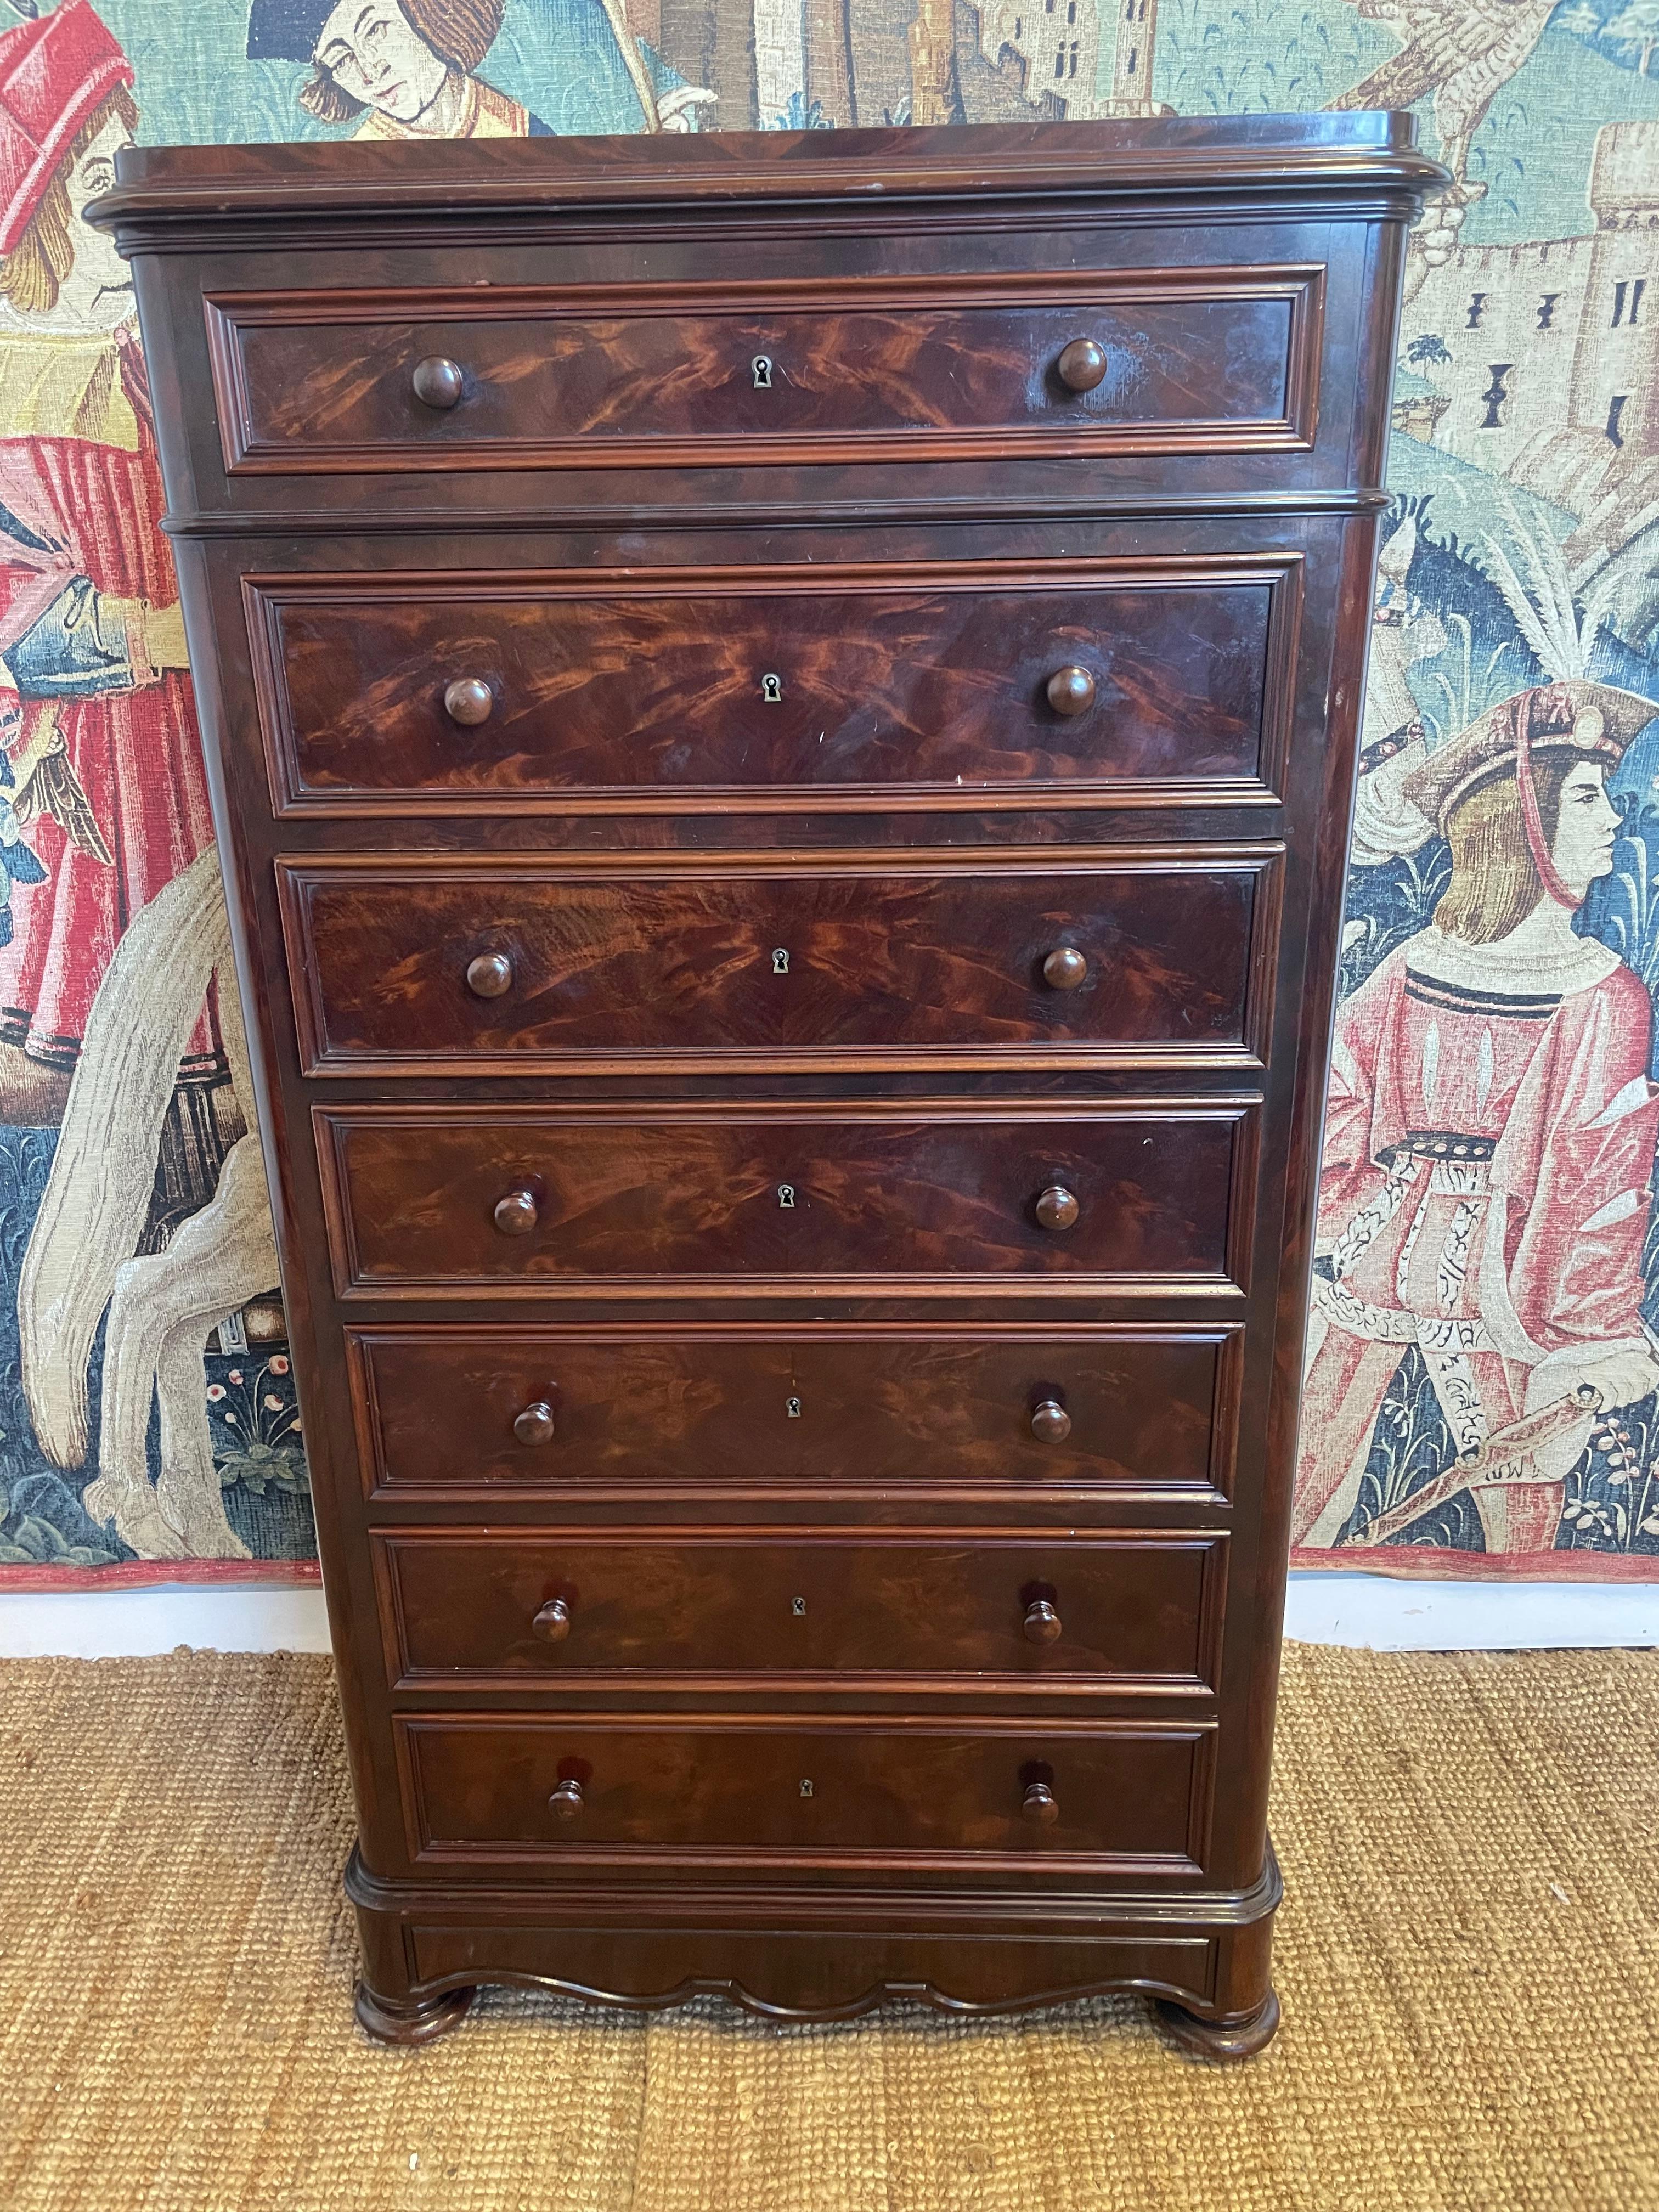 Good example of a 19th century mahogany semainier , French tall narrow chest of drawers , a drawer for each day of the week
Circa 1870’s from the Napoleon III period , with original turned mahogany handles , working locks and a key
This piece has